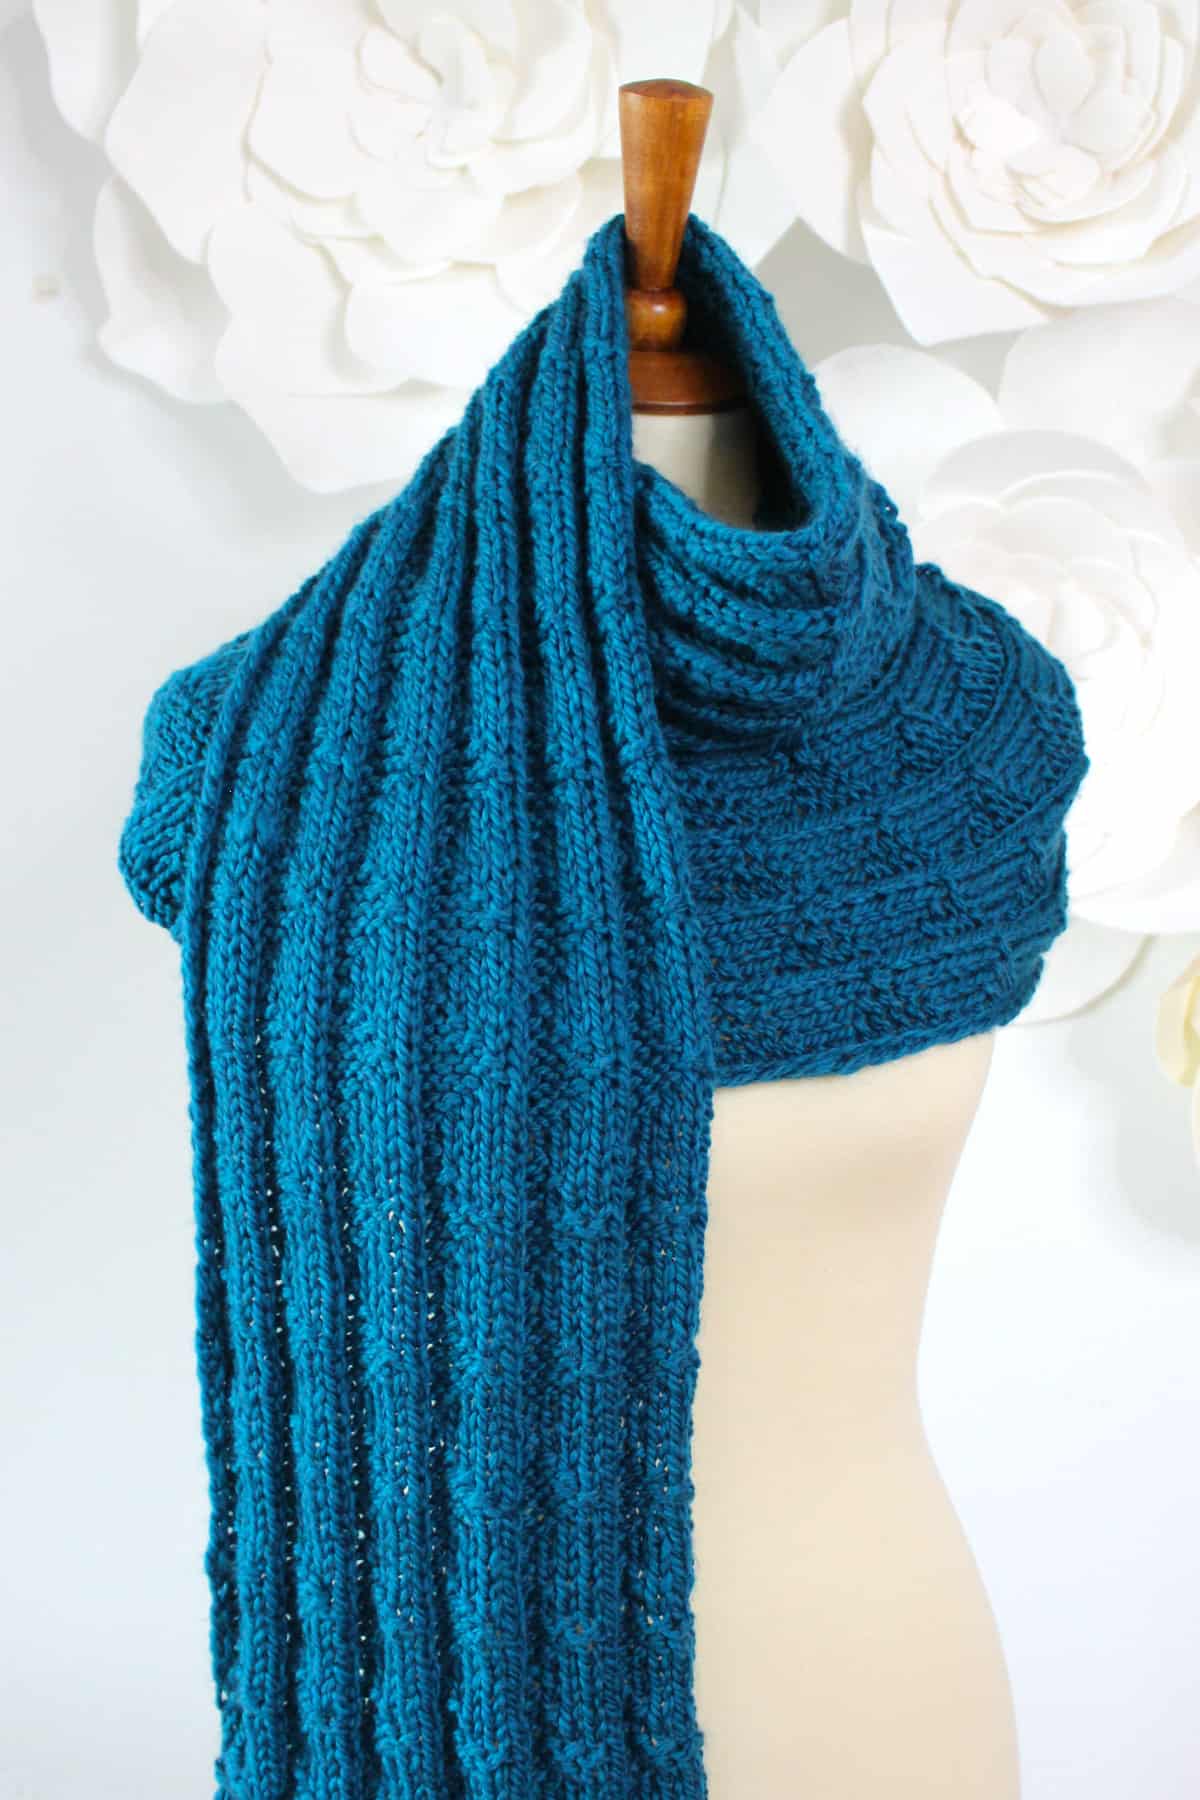 Pennant Pleating knitted scarf wrapped on mannequin in blue color yarn.